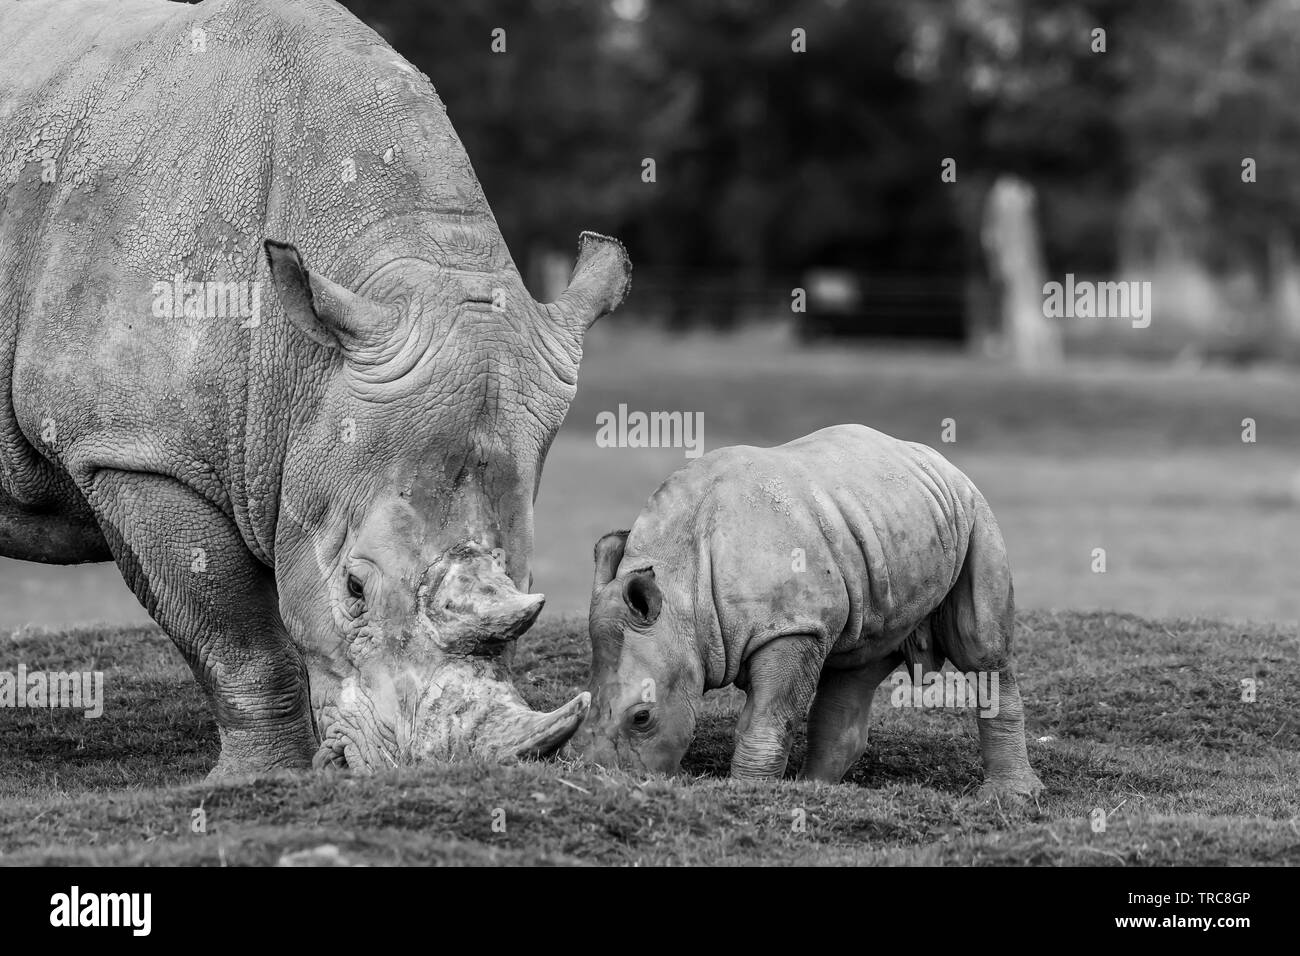 Detailed black & white close-up photograph of Southern White rhinos (Ceratotherium simum) mother & baby, eating together outside at UK wildlife park. Stock Photo